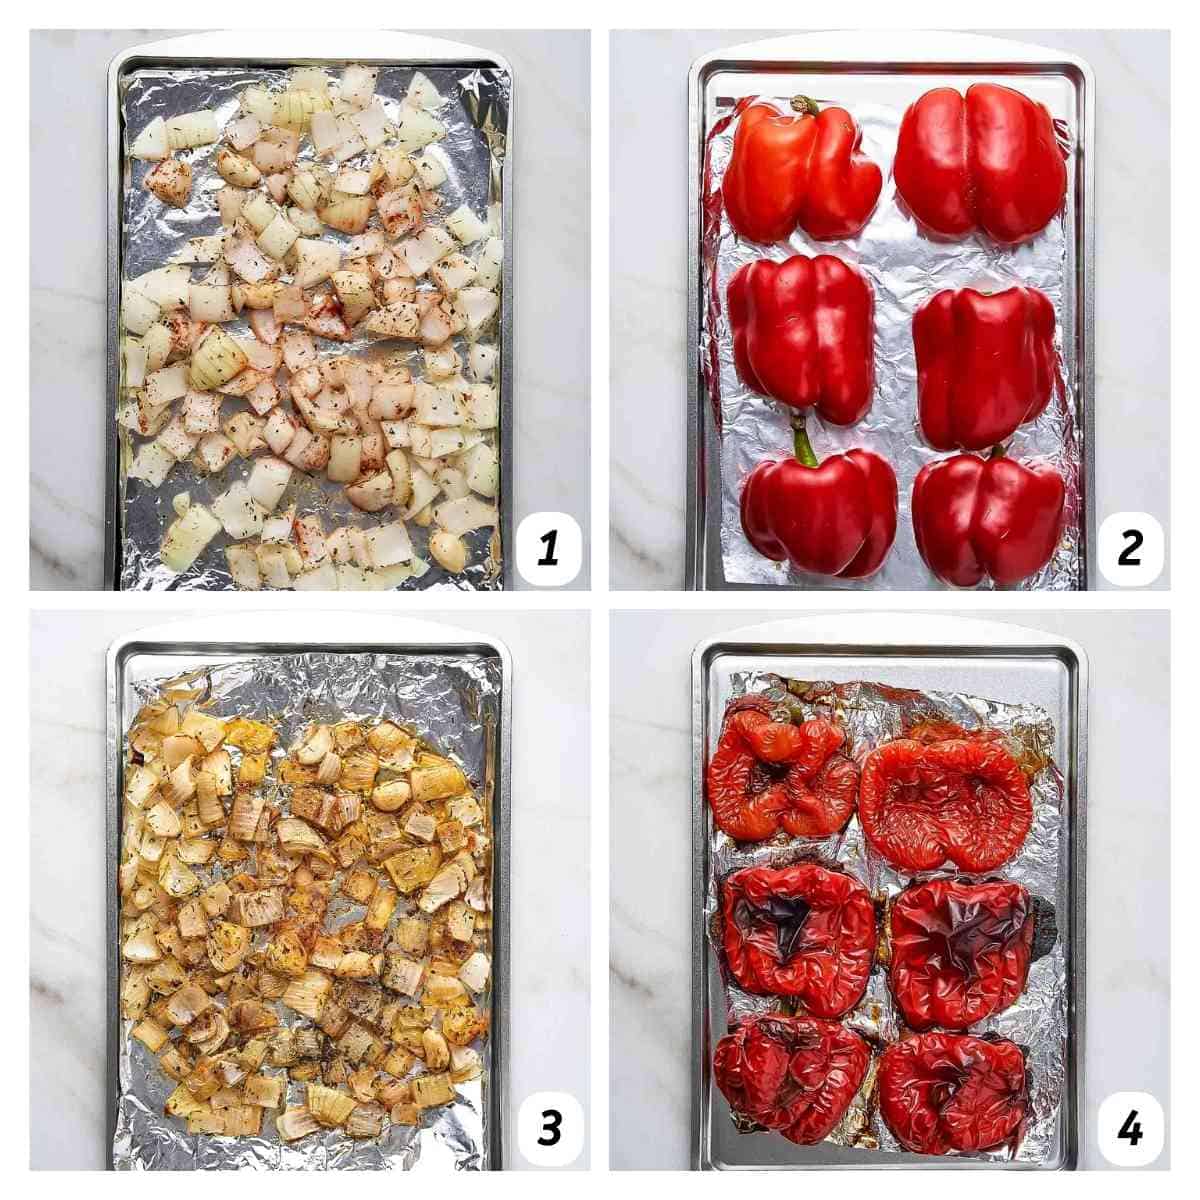 Four panel collage of process shots 1-4 - baking onions with seasoning and halved red bell peppers on separate baking sheets longed with aluminum foil.